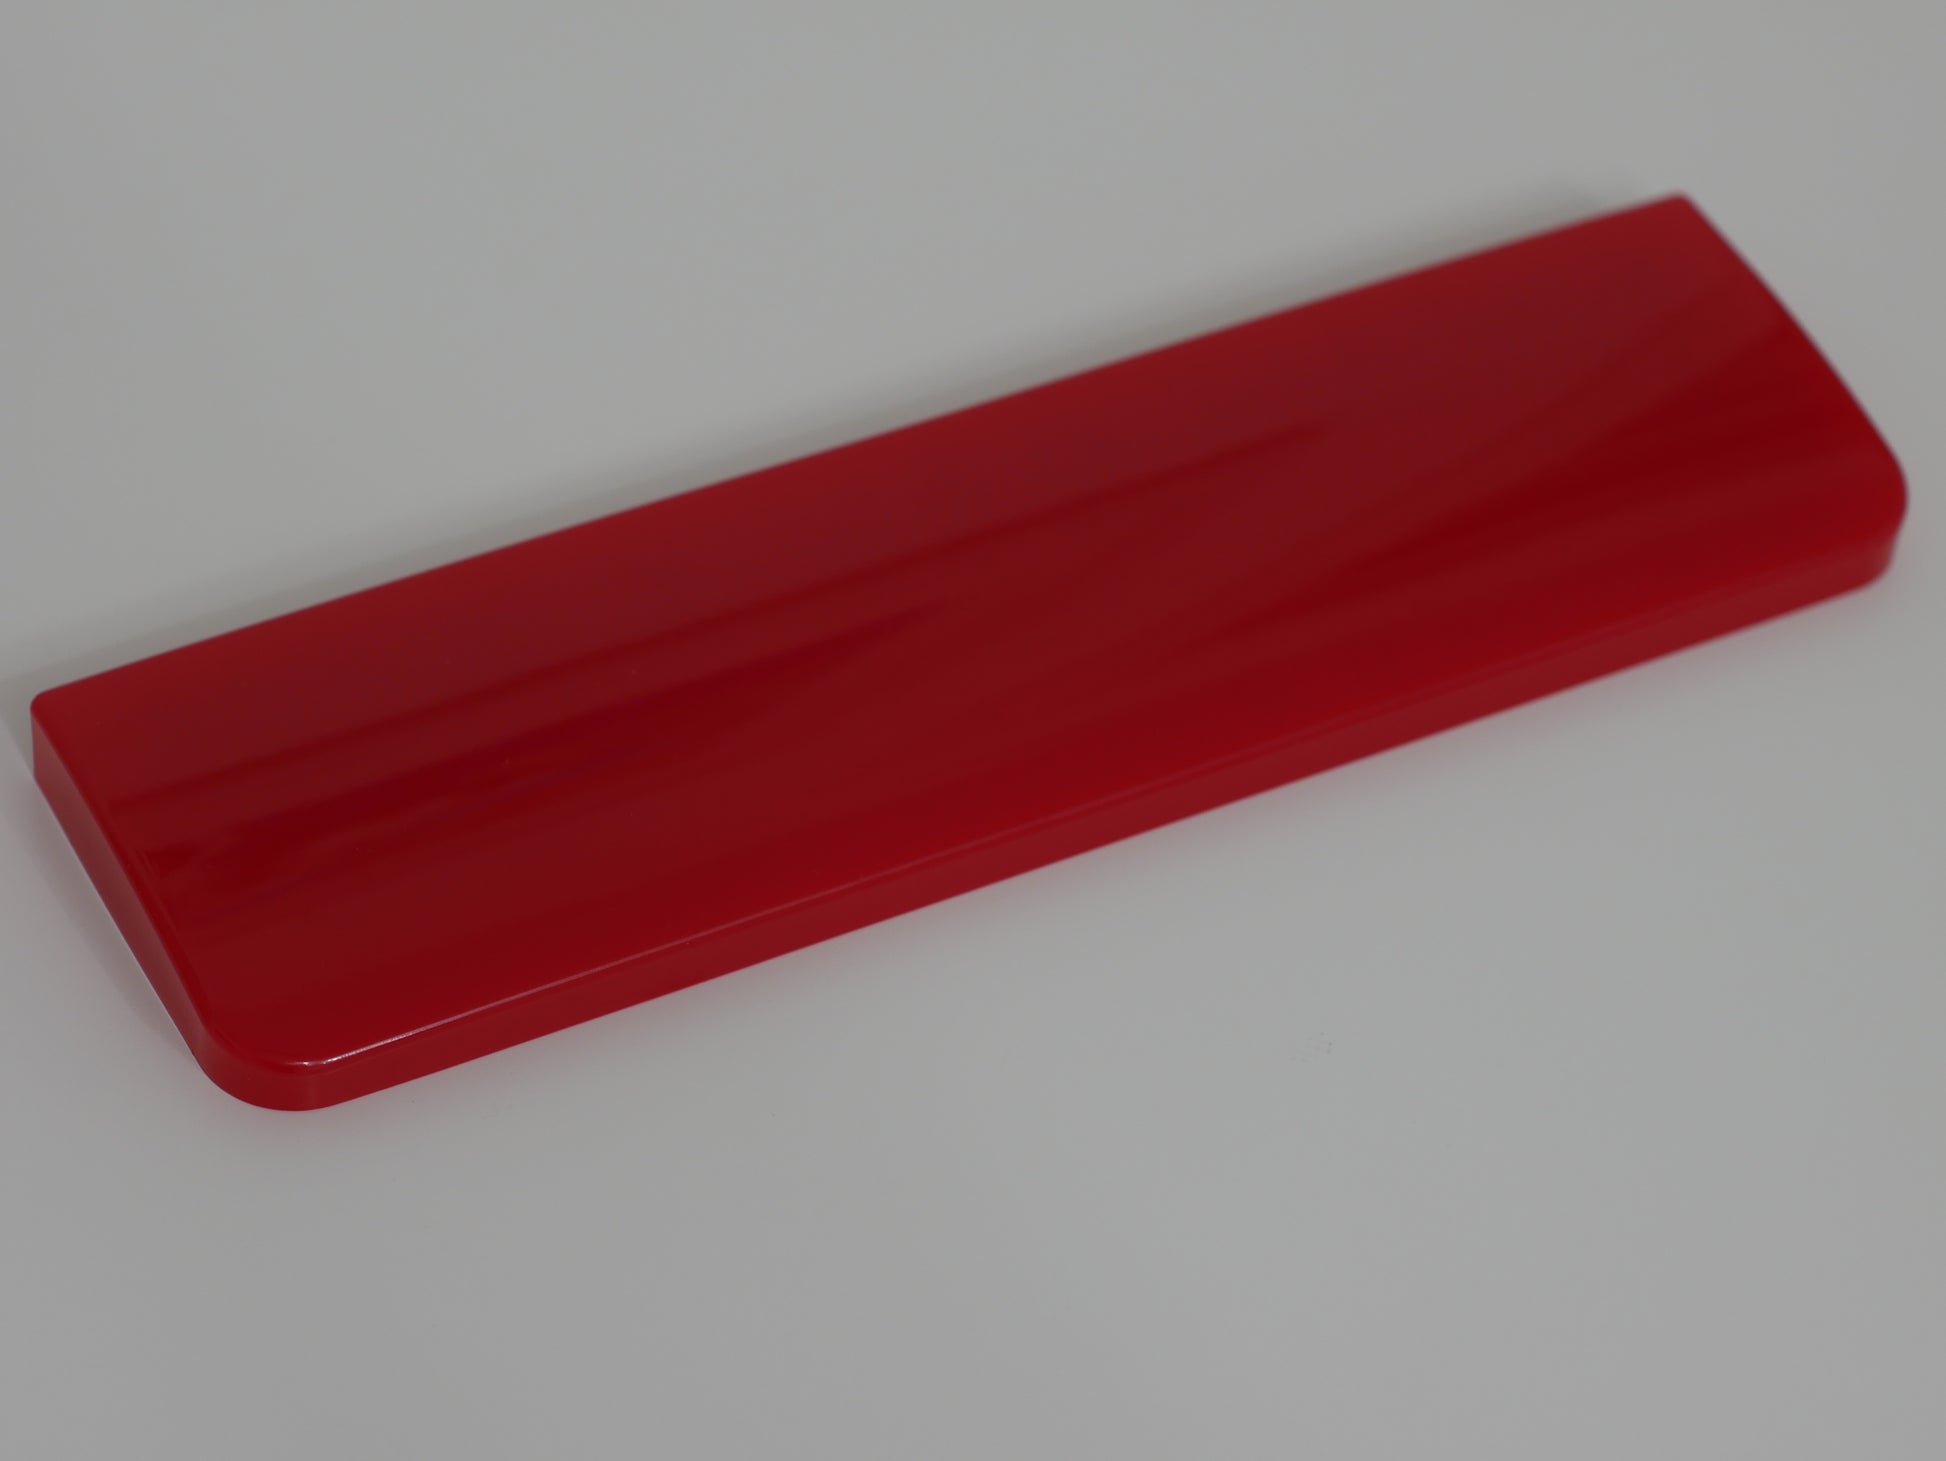 Solid Color Resin Keyboard Wrist Rest - Red (11.75" x 3") - Desk Cookies